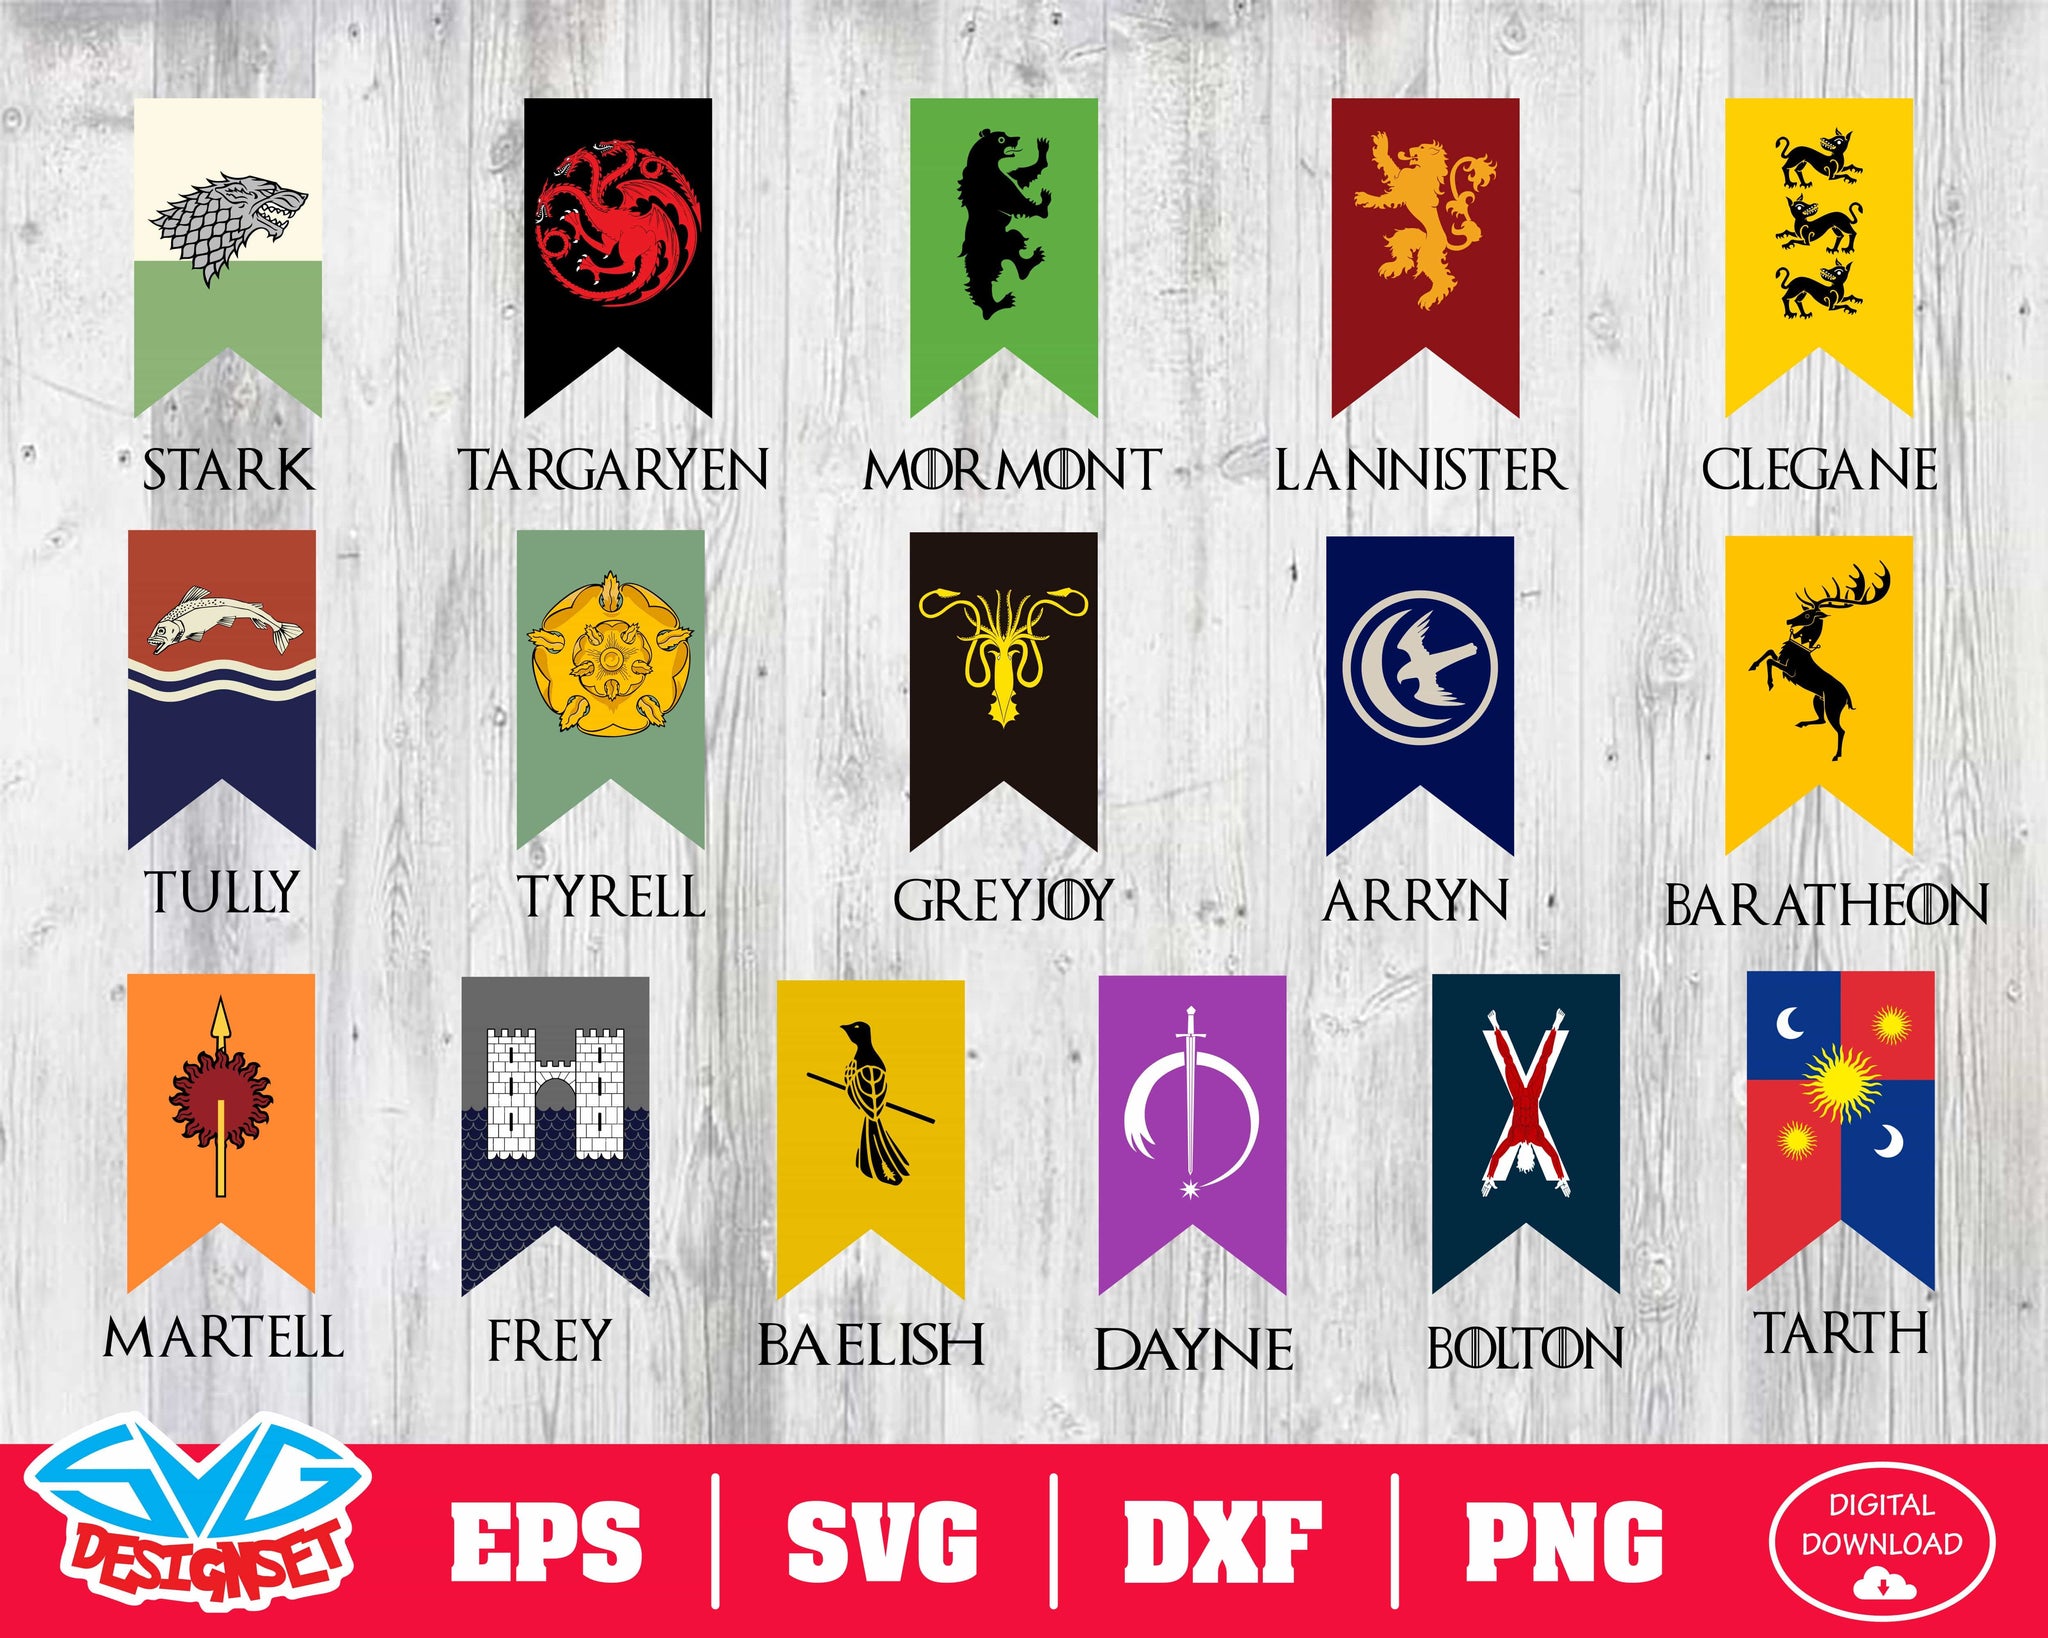 Game of Thrones Svg, Dxf, Eps, Png, Clipart, Silhouette and Cutfiles #4 - SVGDesignSets